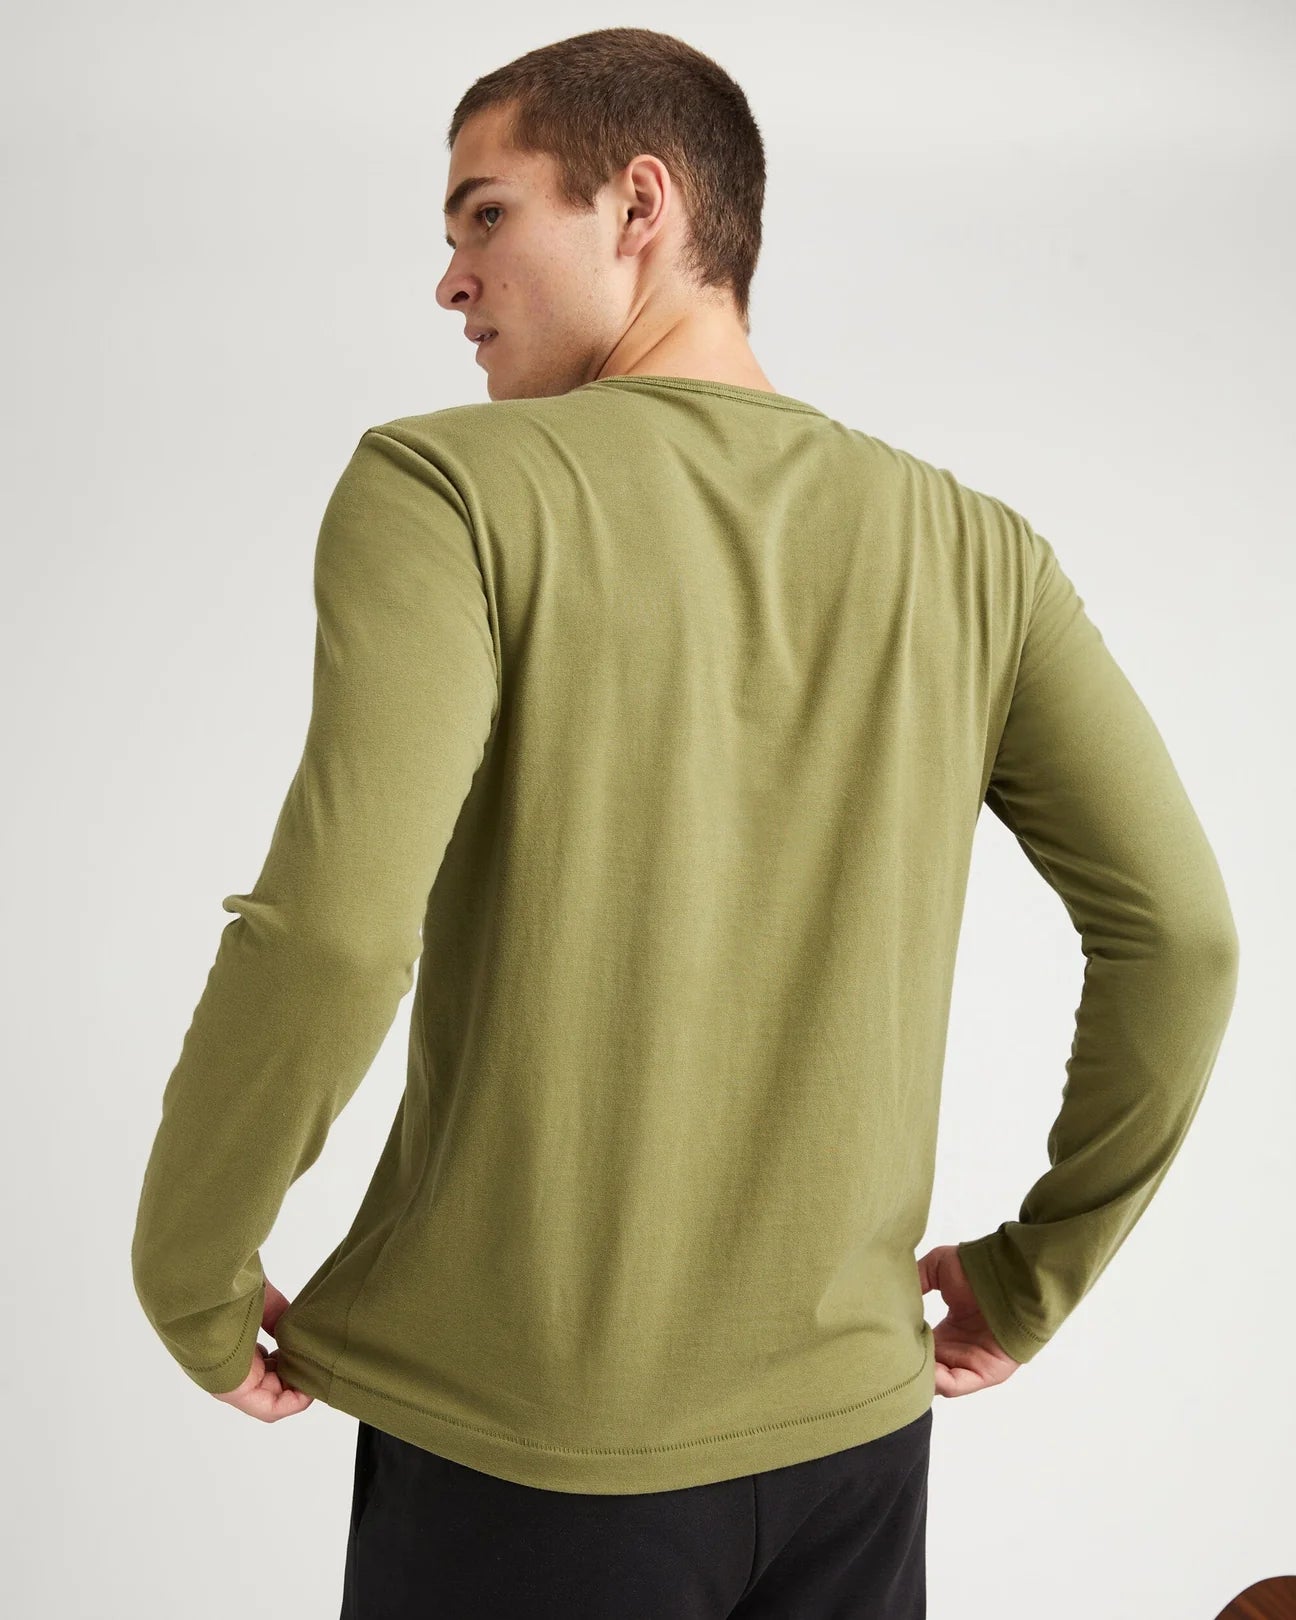 back view of model wearing a long sleeve green t-shirt